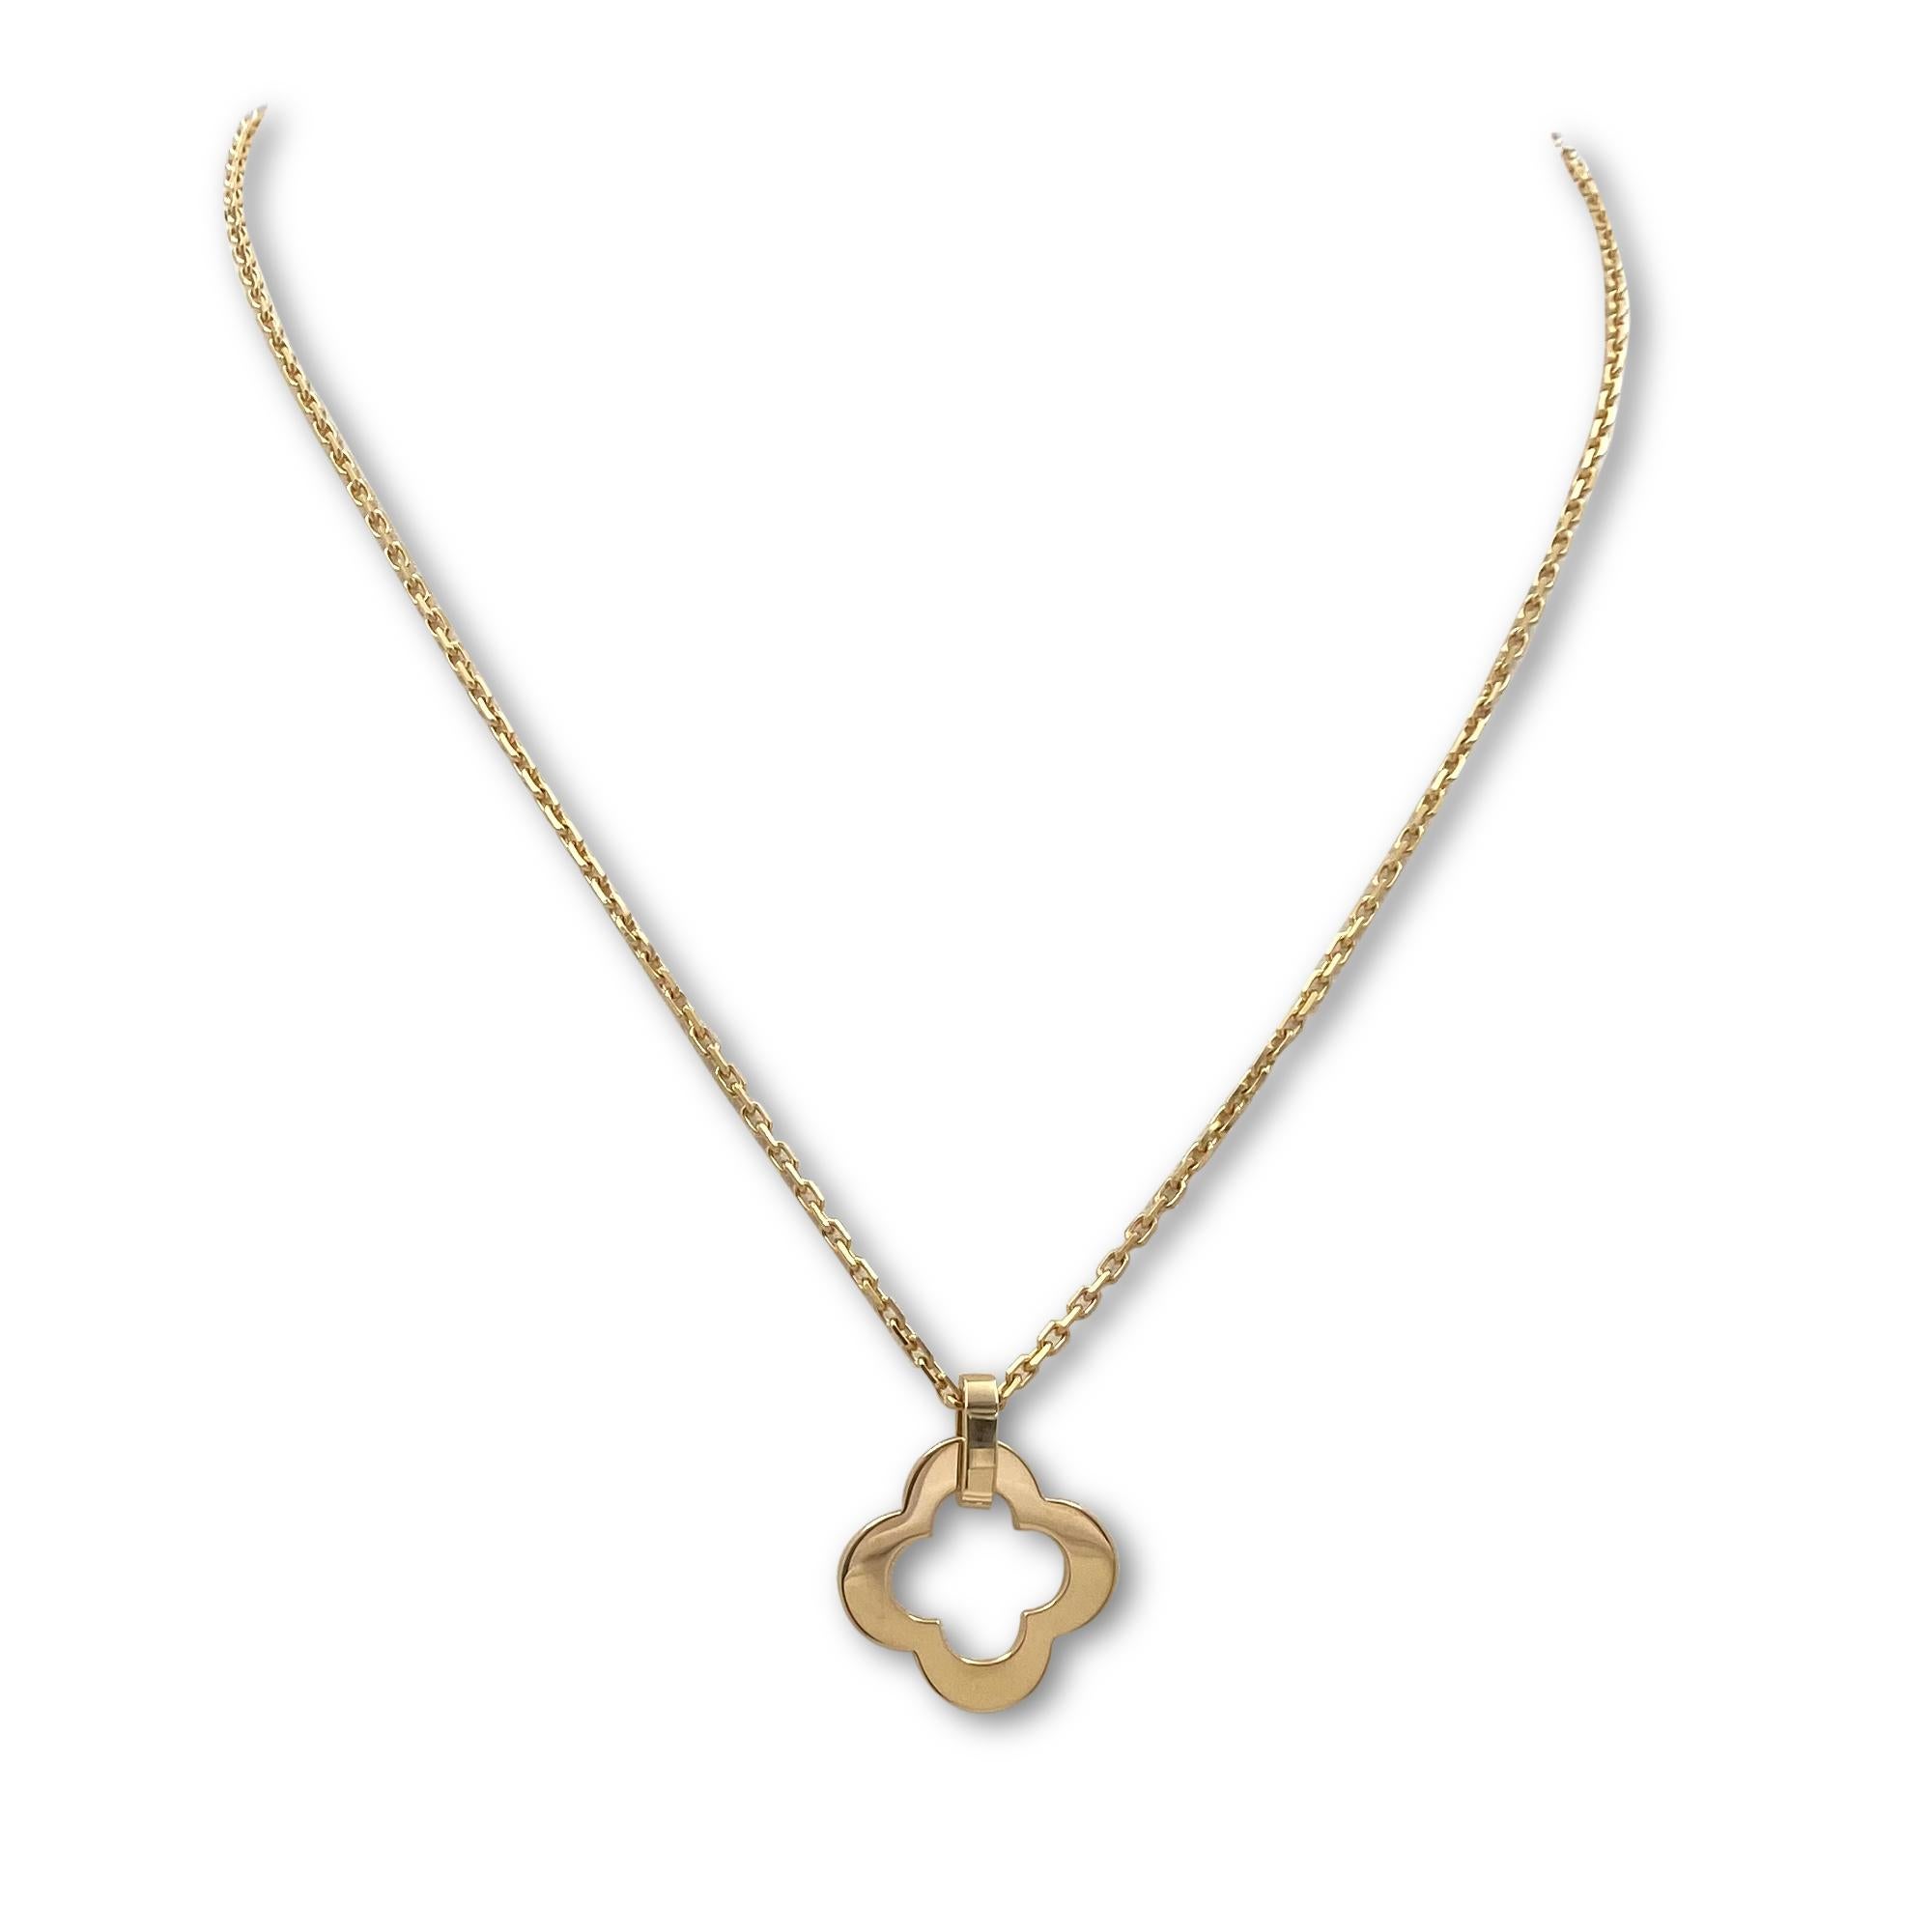 Authentic Van Cleef & Arpels Byzantine Alhambra pendant necklace crafted in 18 karat yellow gold and featuring a single clover-inspired openwork motif.  The pendant hangs from an 18 1/2 inch adjustable chain.  Signed VCA, Au750, with serial number